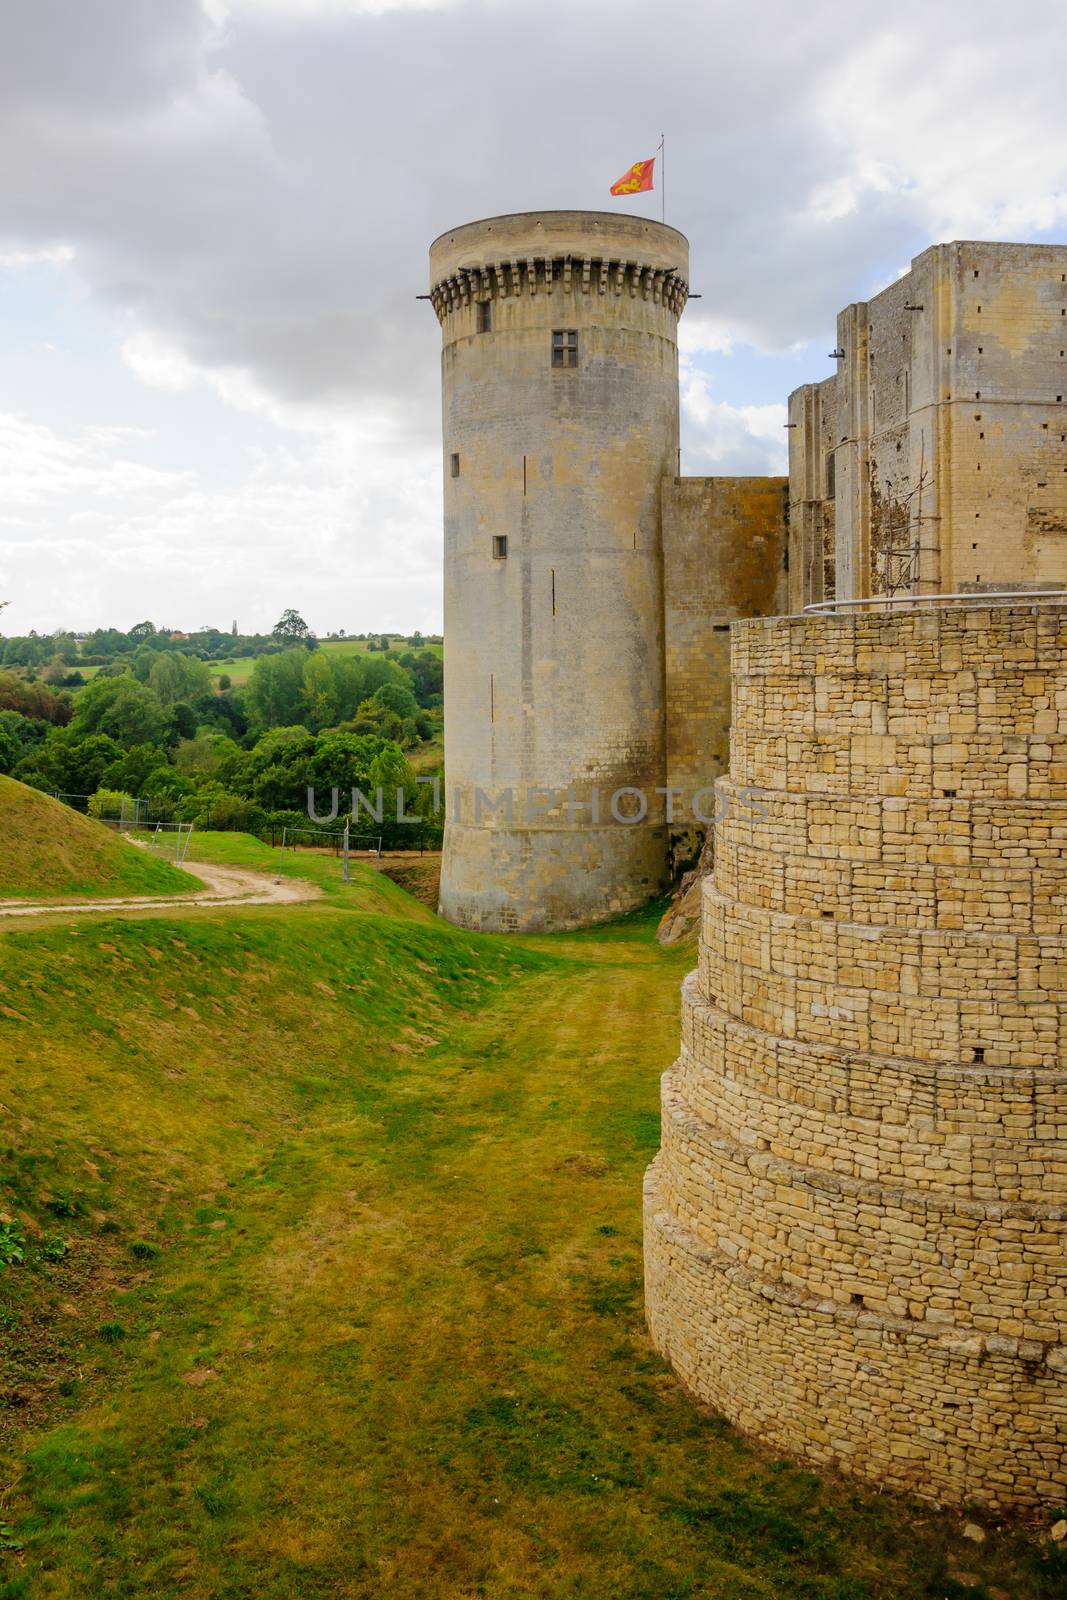 View of the Chateau de Falaise by RnDmS